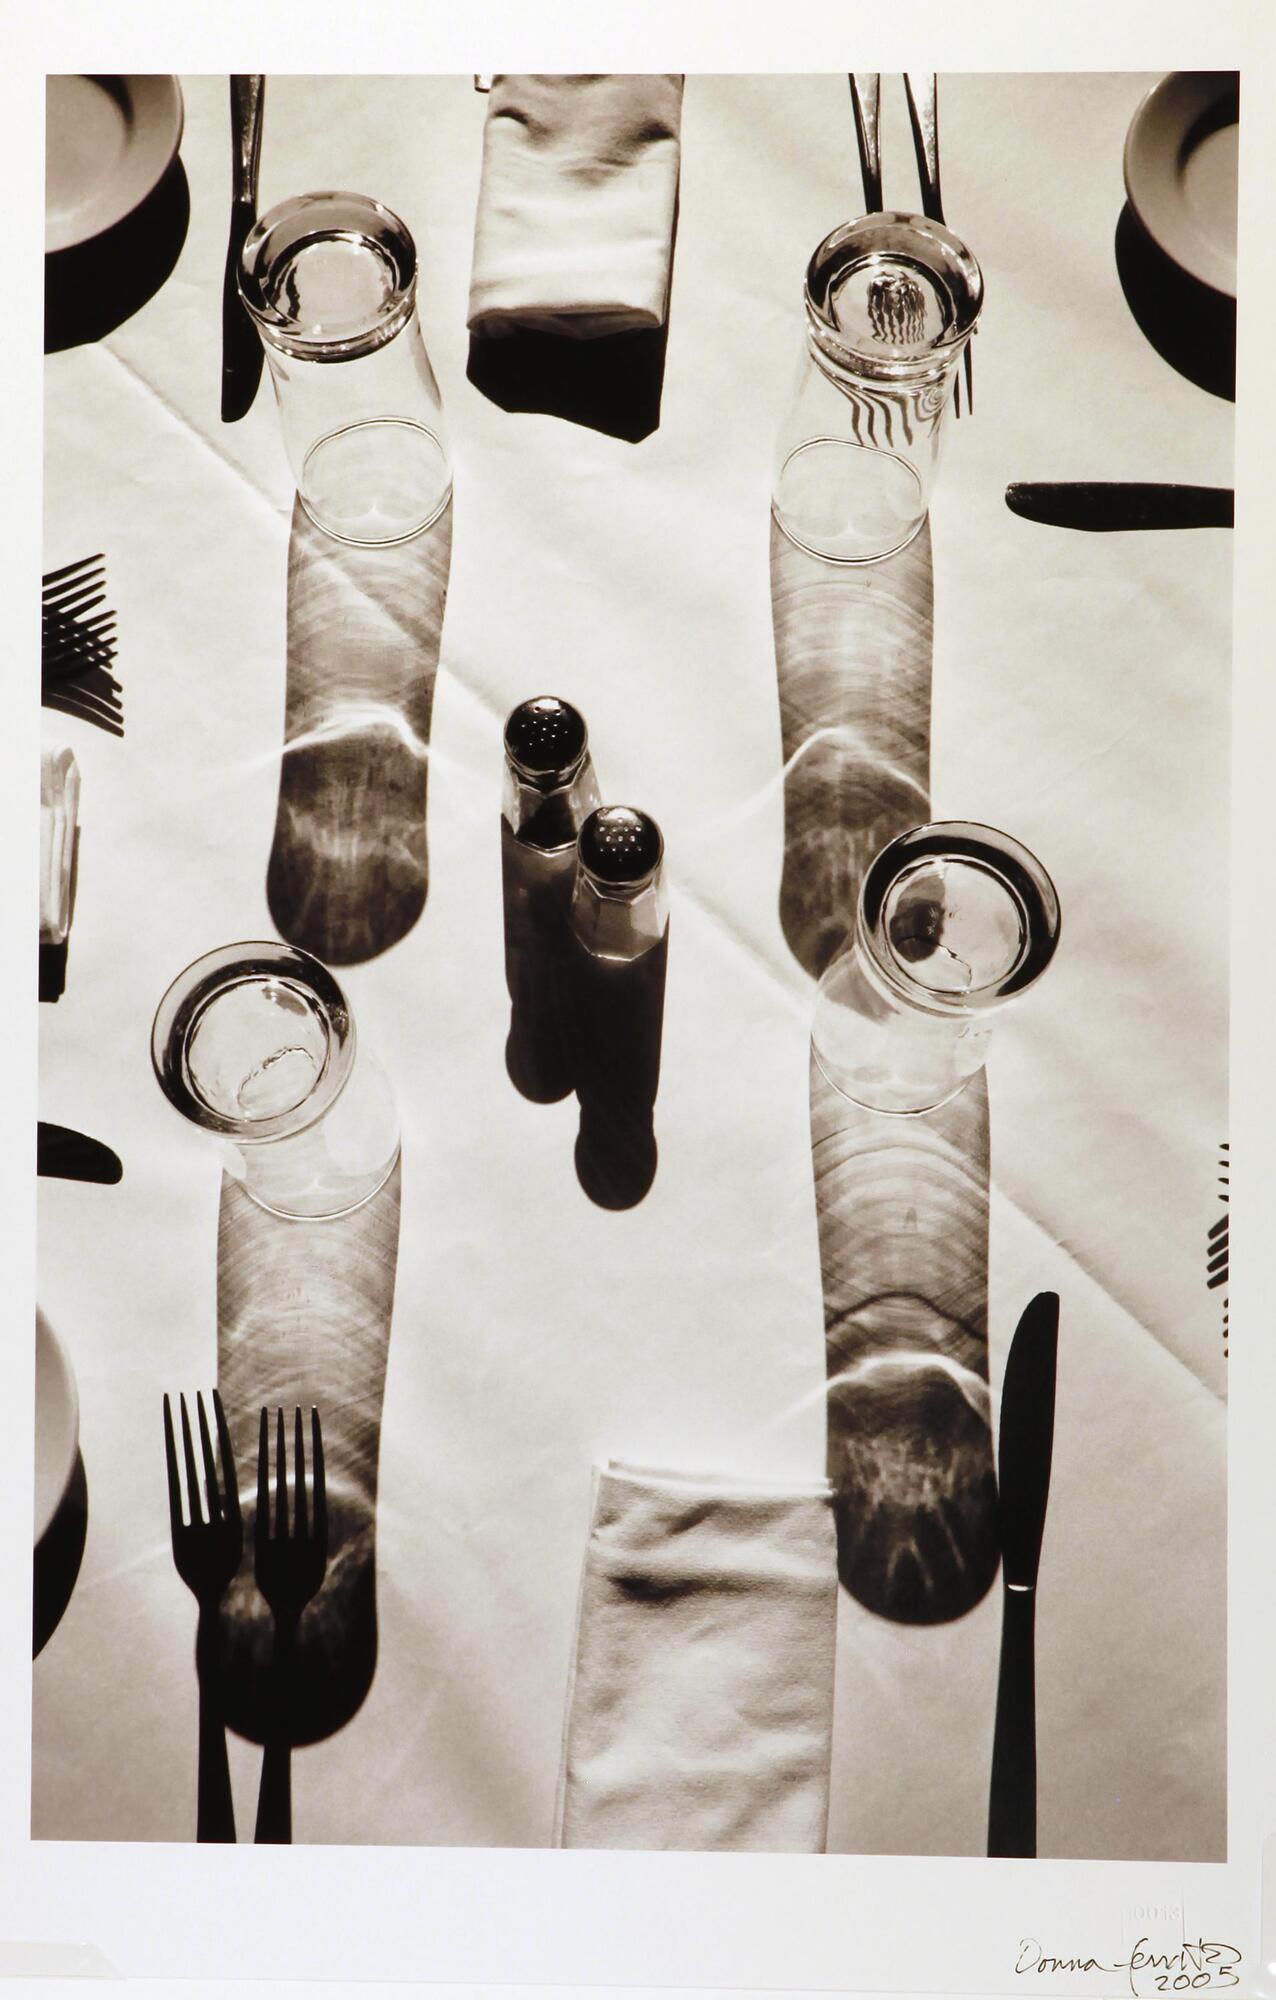 This is a black and white photograph of several place settings on a cloth covered table. Plates, forks and napkins are arranged around salt and pepper shakers in the center. There are four clear glasses that have shadows projecting designs onto the tablecloth. The viewpoint is looking down from above.